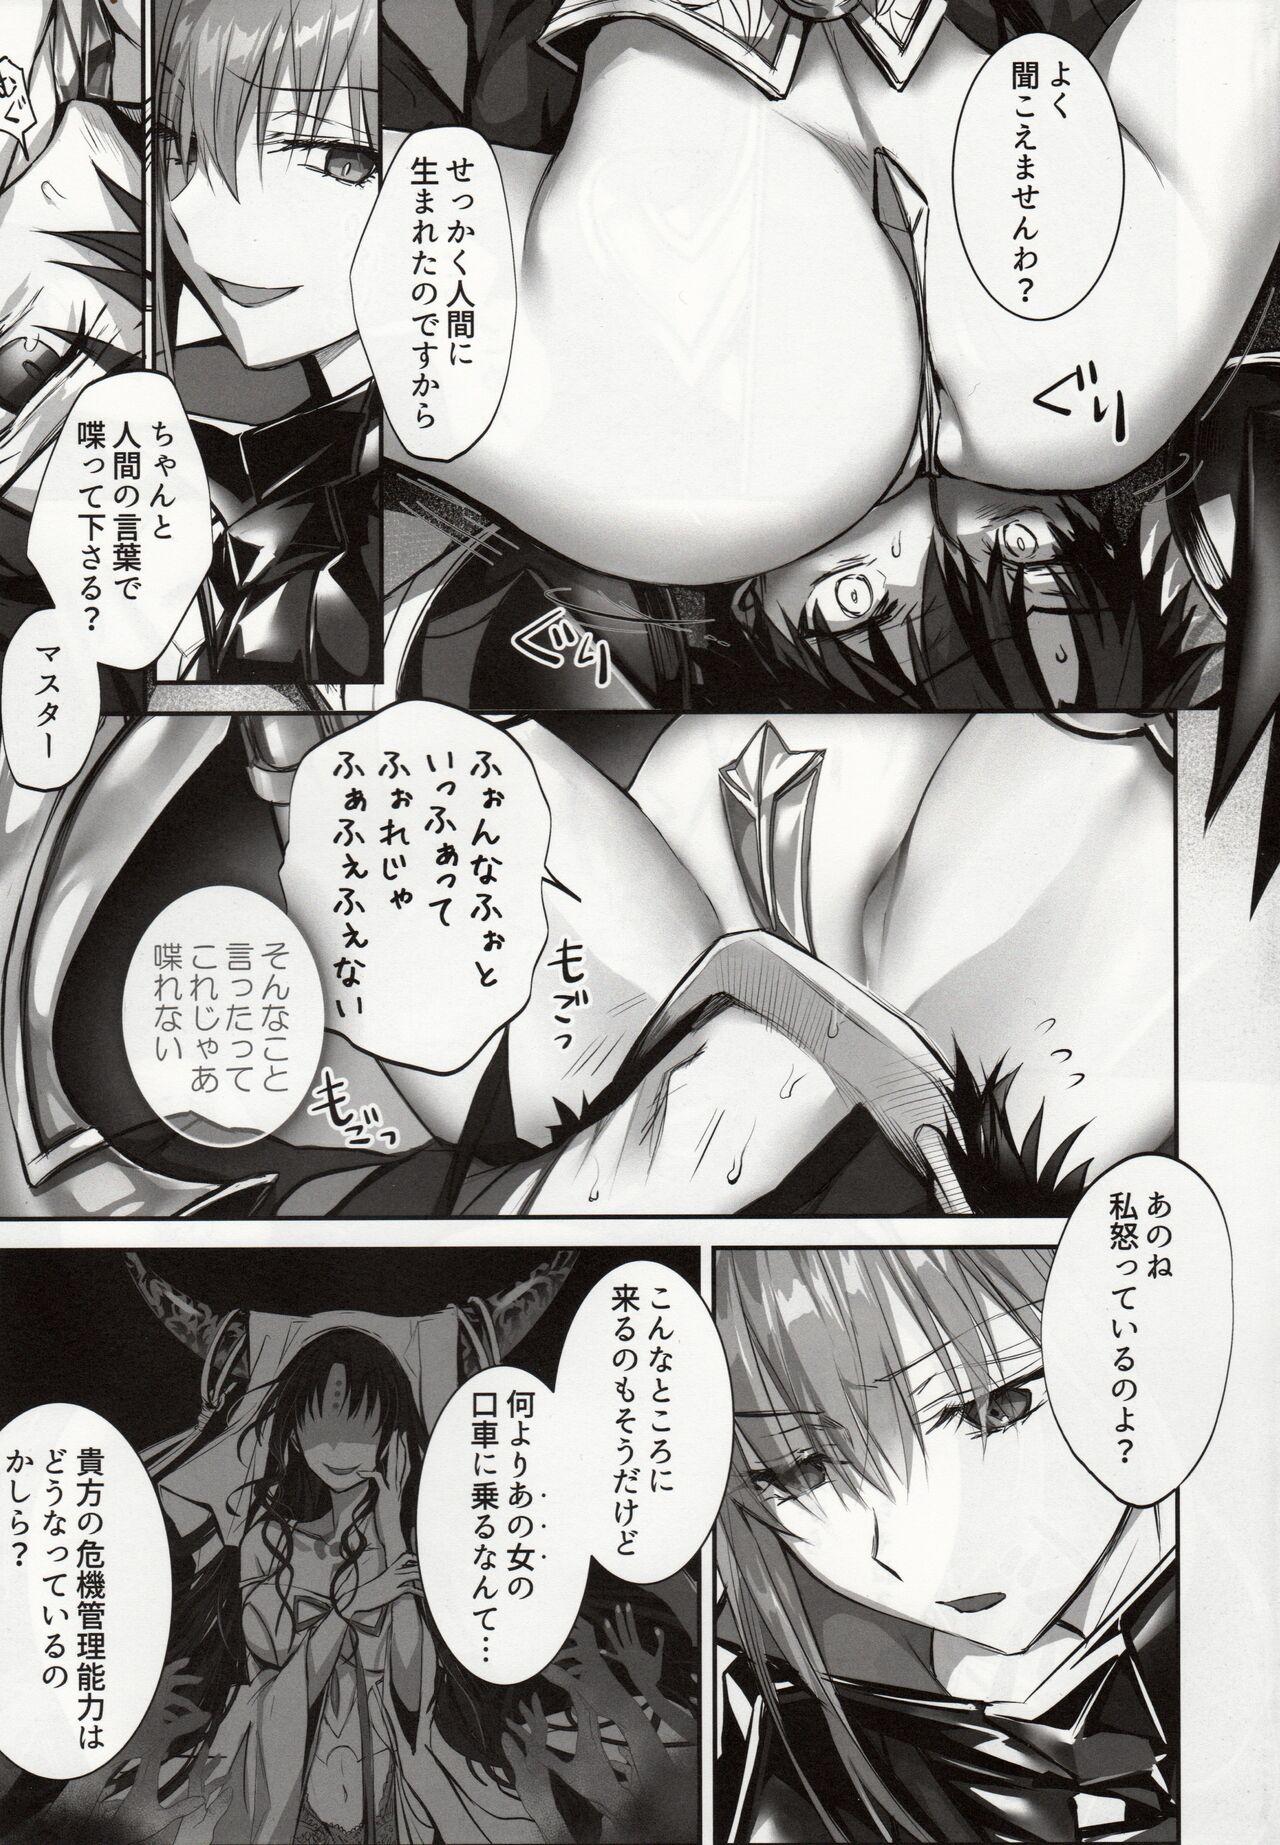 Nalgas the innermoSt of the Girl - Fate grand order Watersports - Page 8